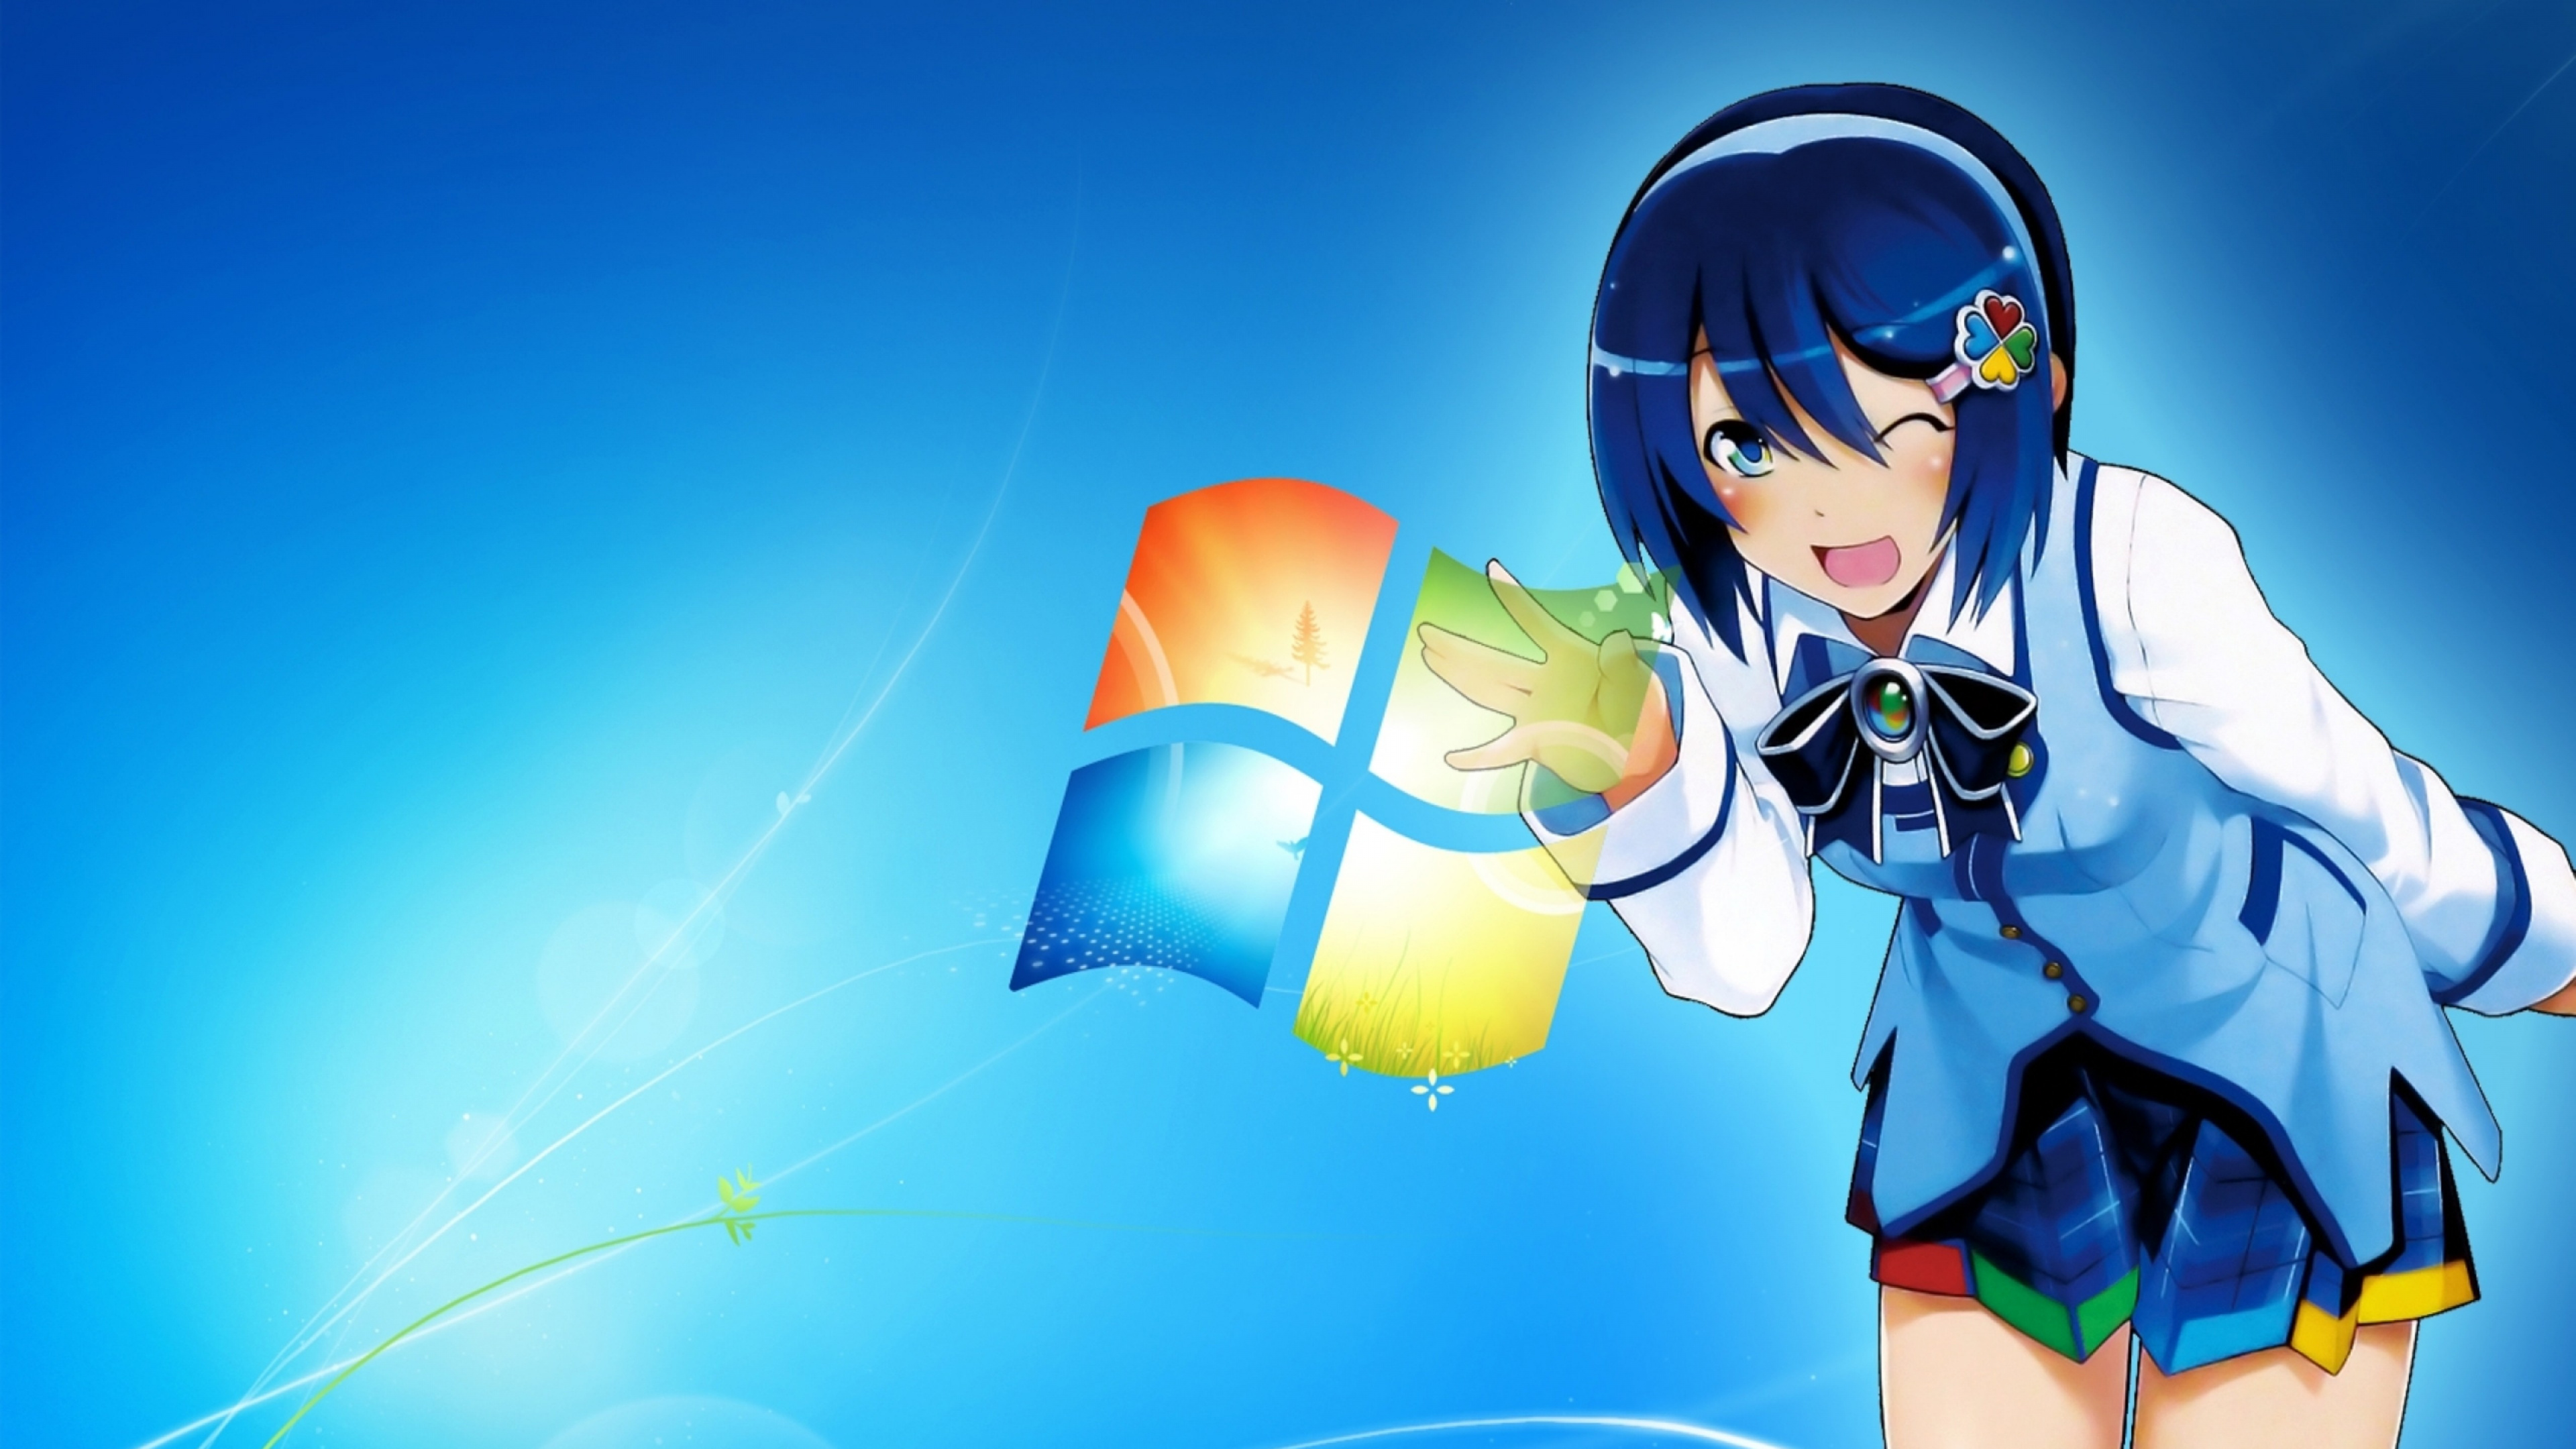 Woman in Blue and White School Uniform Anime Character. Wallpaper in 3840x2160 Resolution